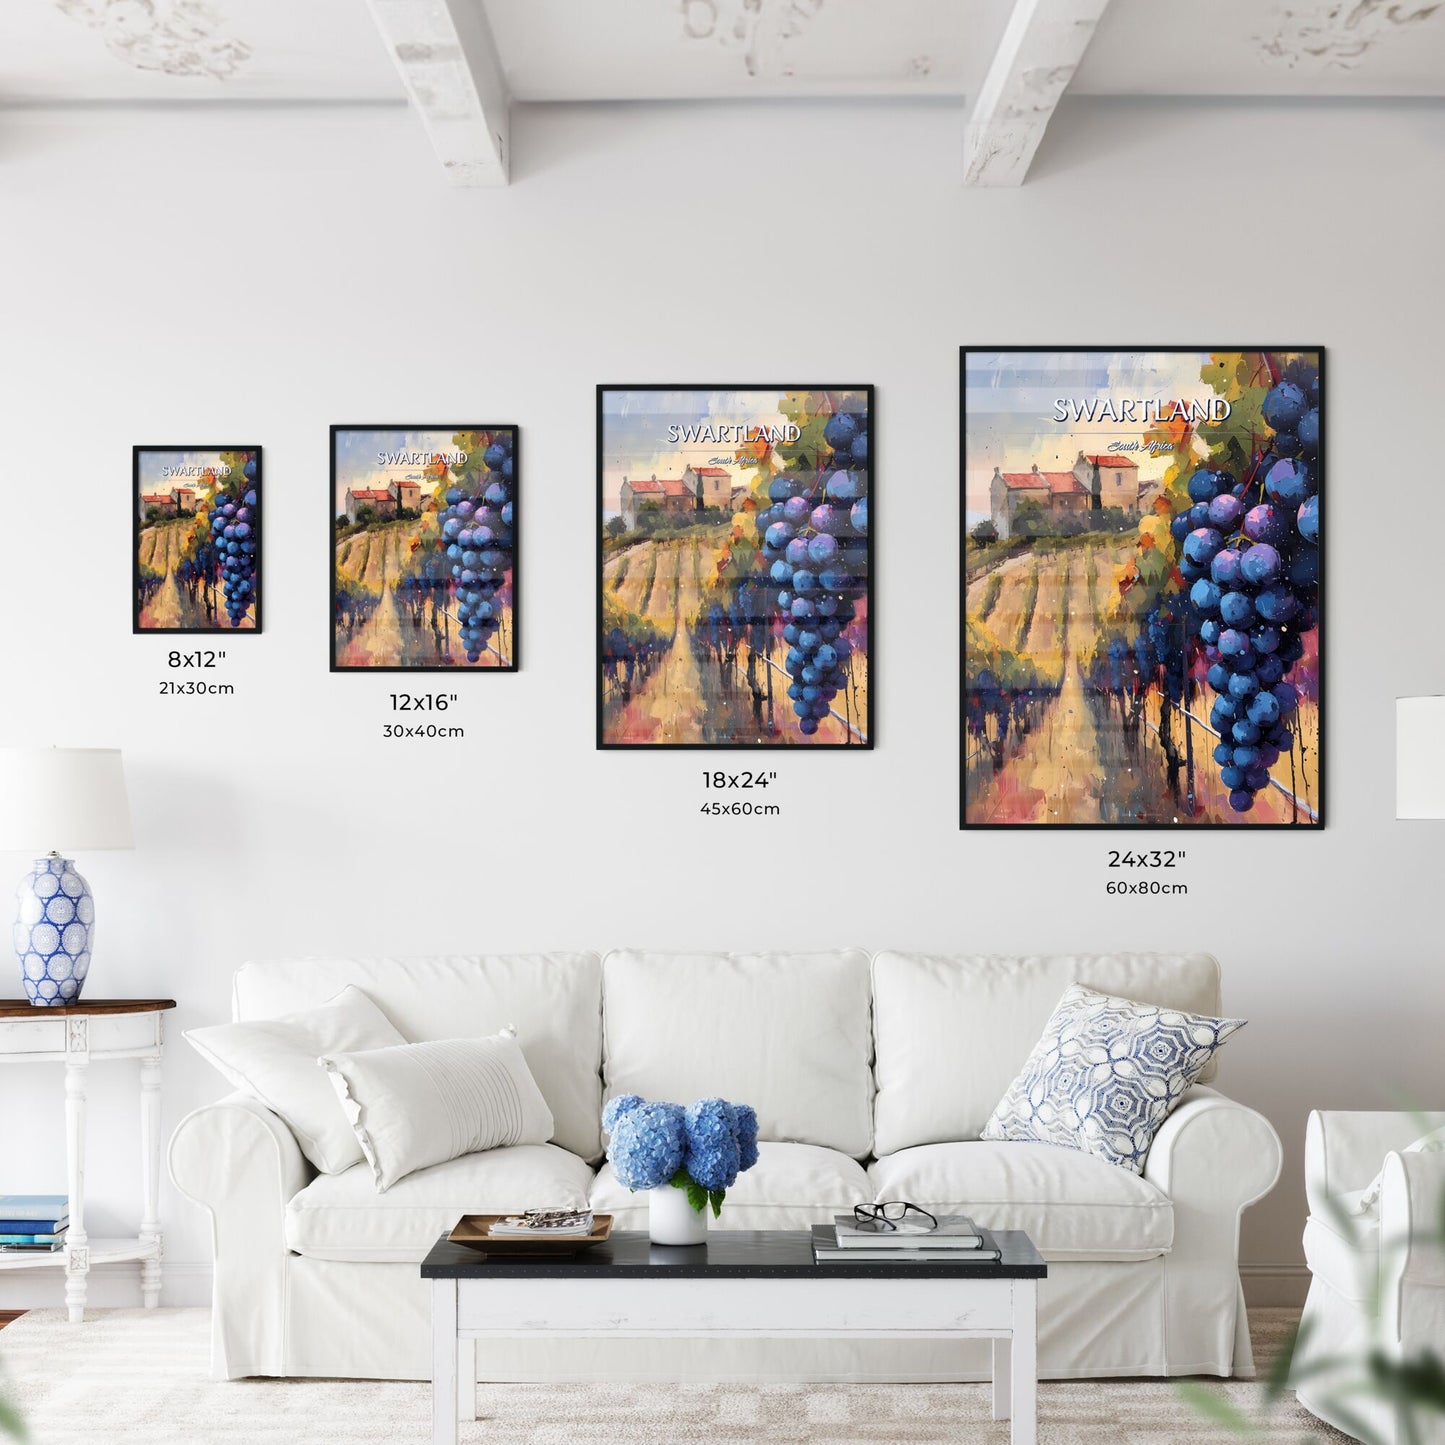 Swartland, South Africa - Art print of a painting of grapes on a vineyard Default Title